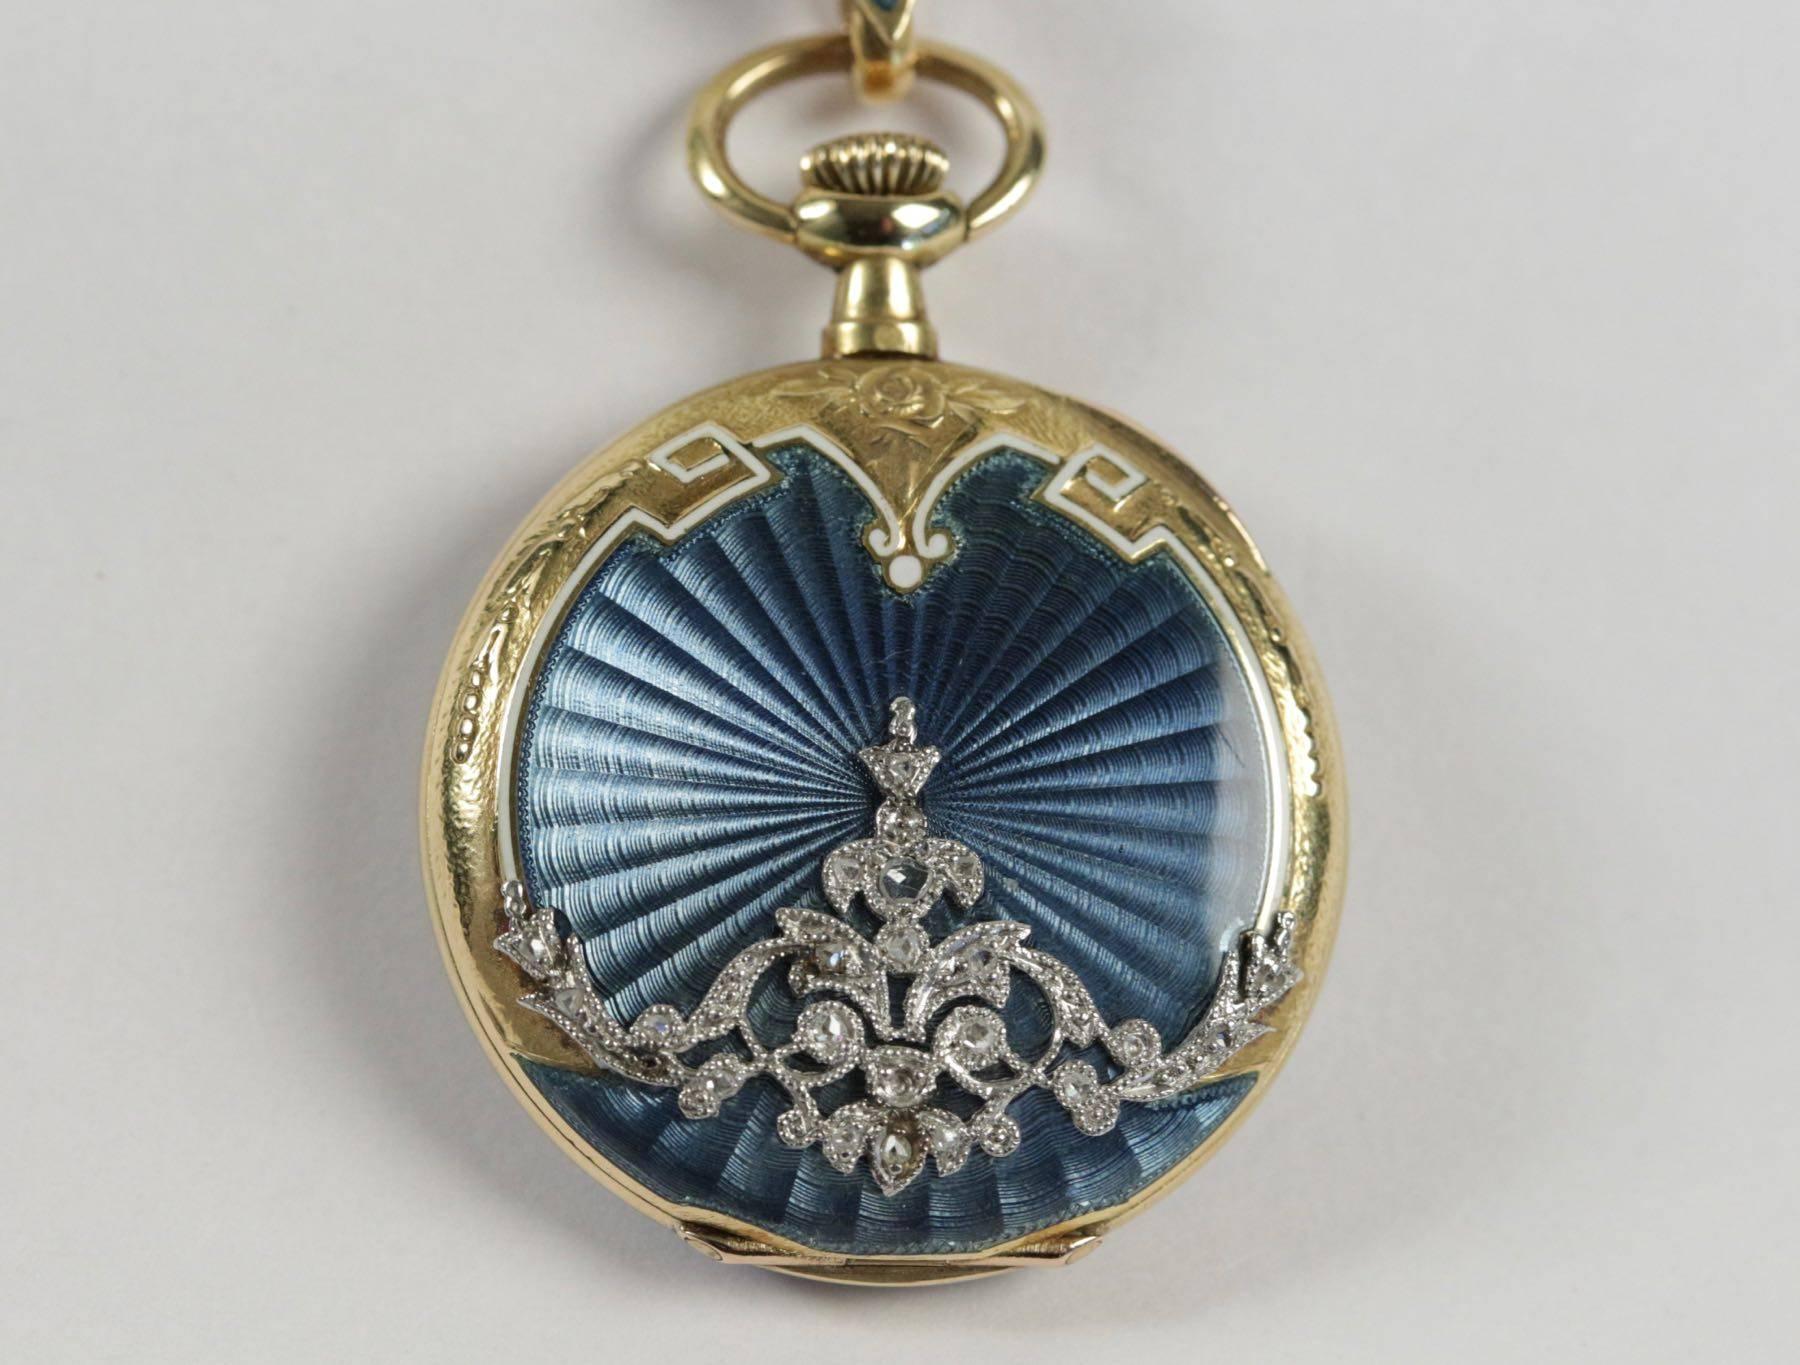 18k yellow gold enamel and diamonds ladies pocket watch with its original brooch. French work.